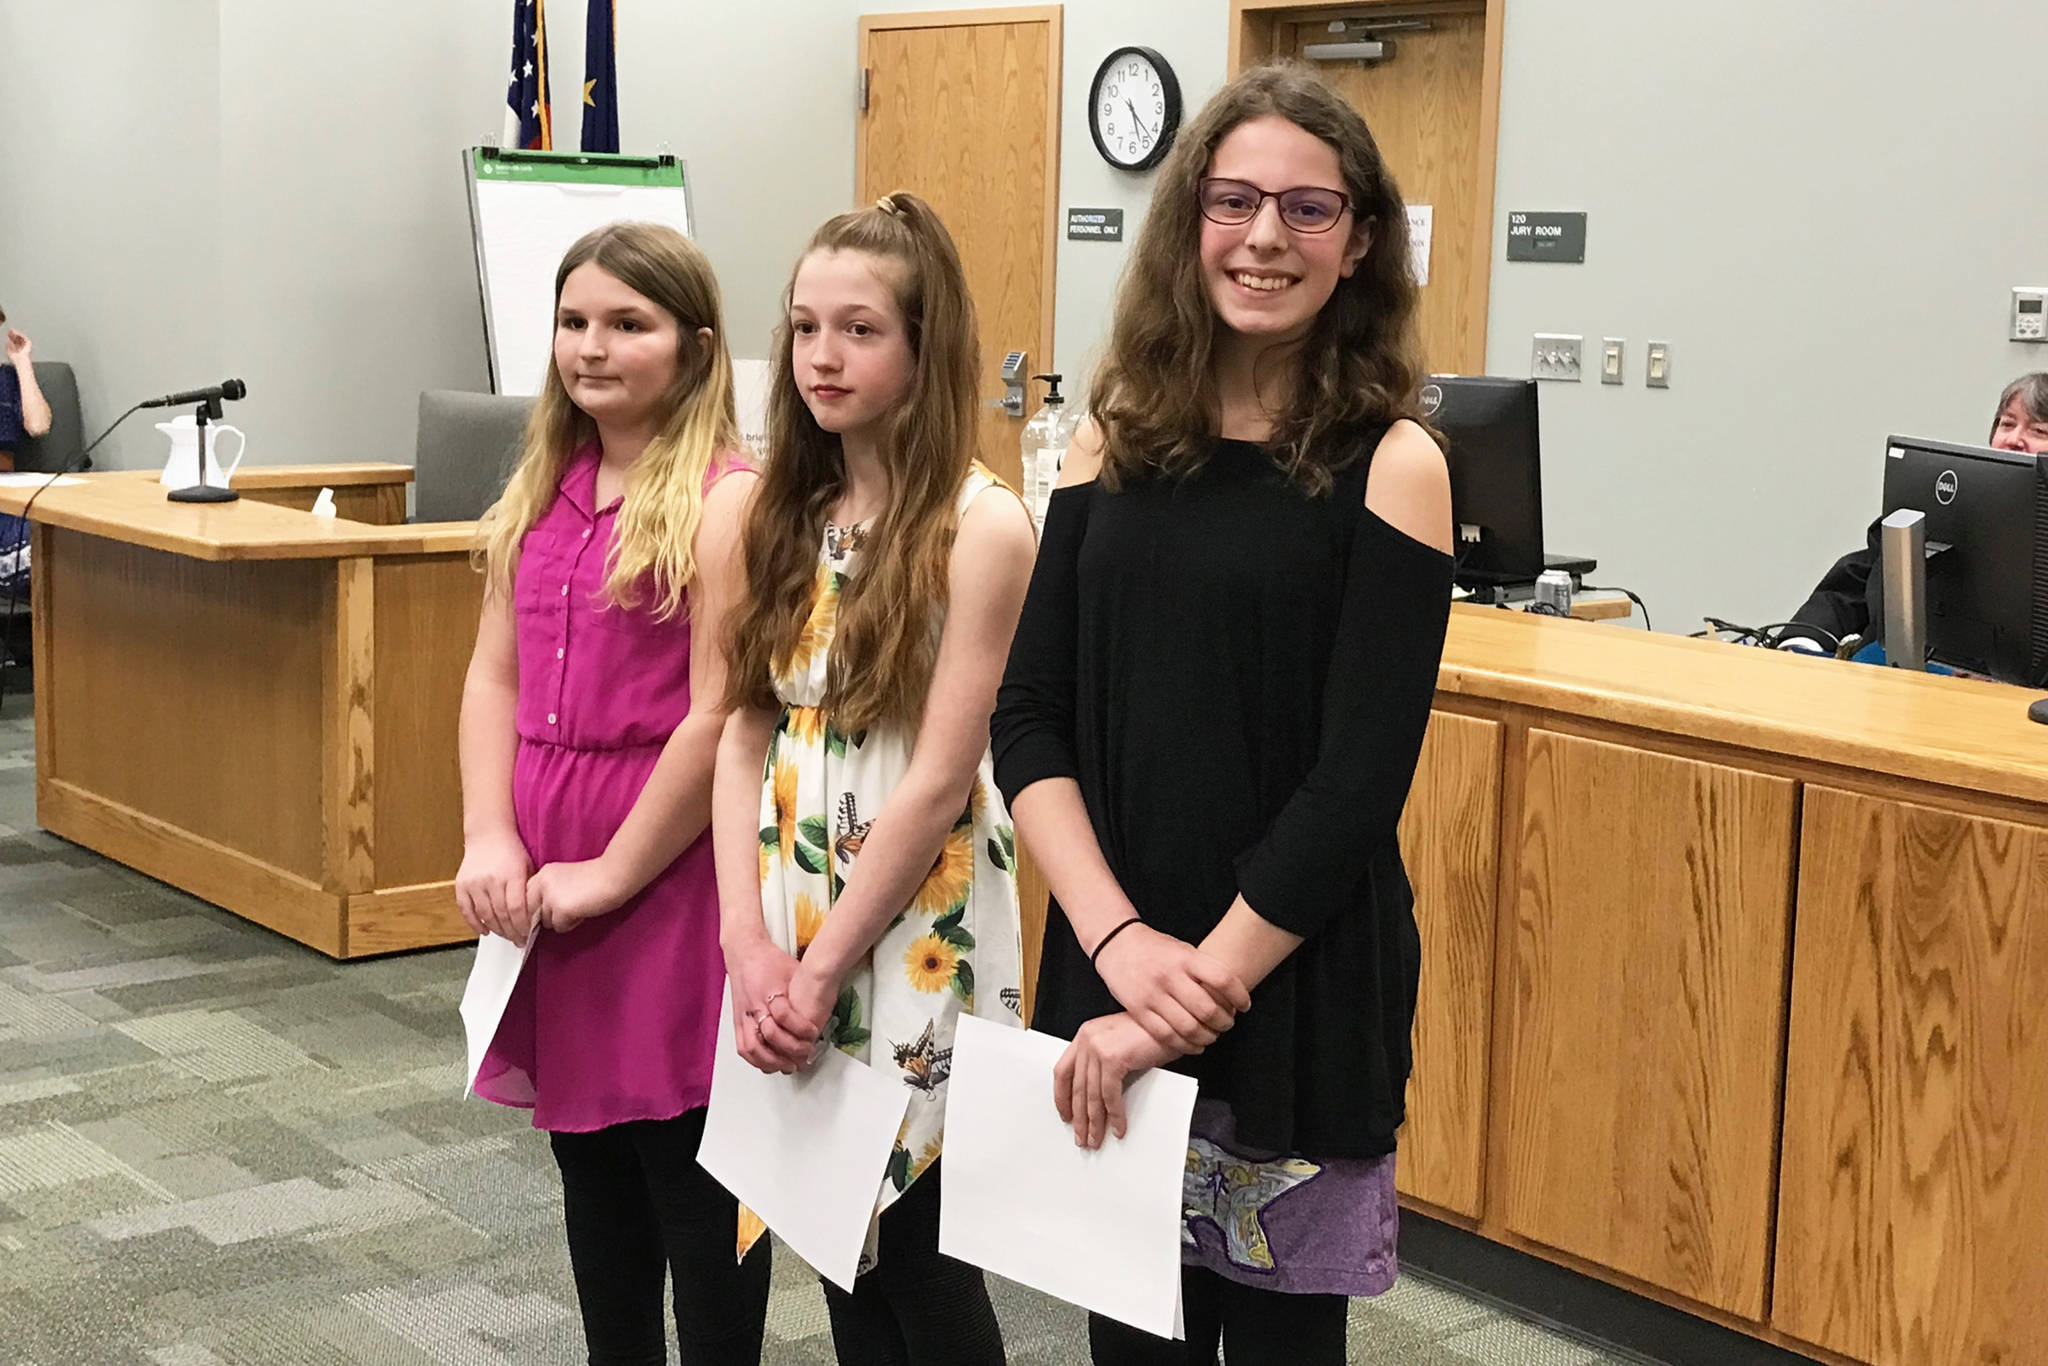 Left to right: Kaiah Stineff, Claira Booz and Rainey Sundheim receive an award during a Youth Court program induction ceremony on March 27, 2019 at the Homer Courthouse in Homer, Alaska. They all got a perfect score on the bar exam they had to take through the program. (Photo courtesy Becky Paul)